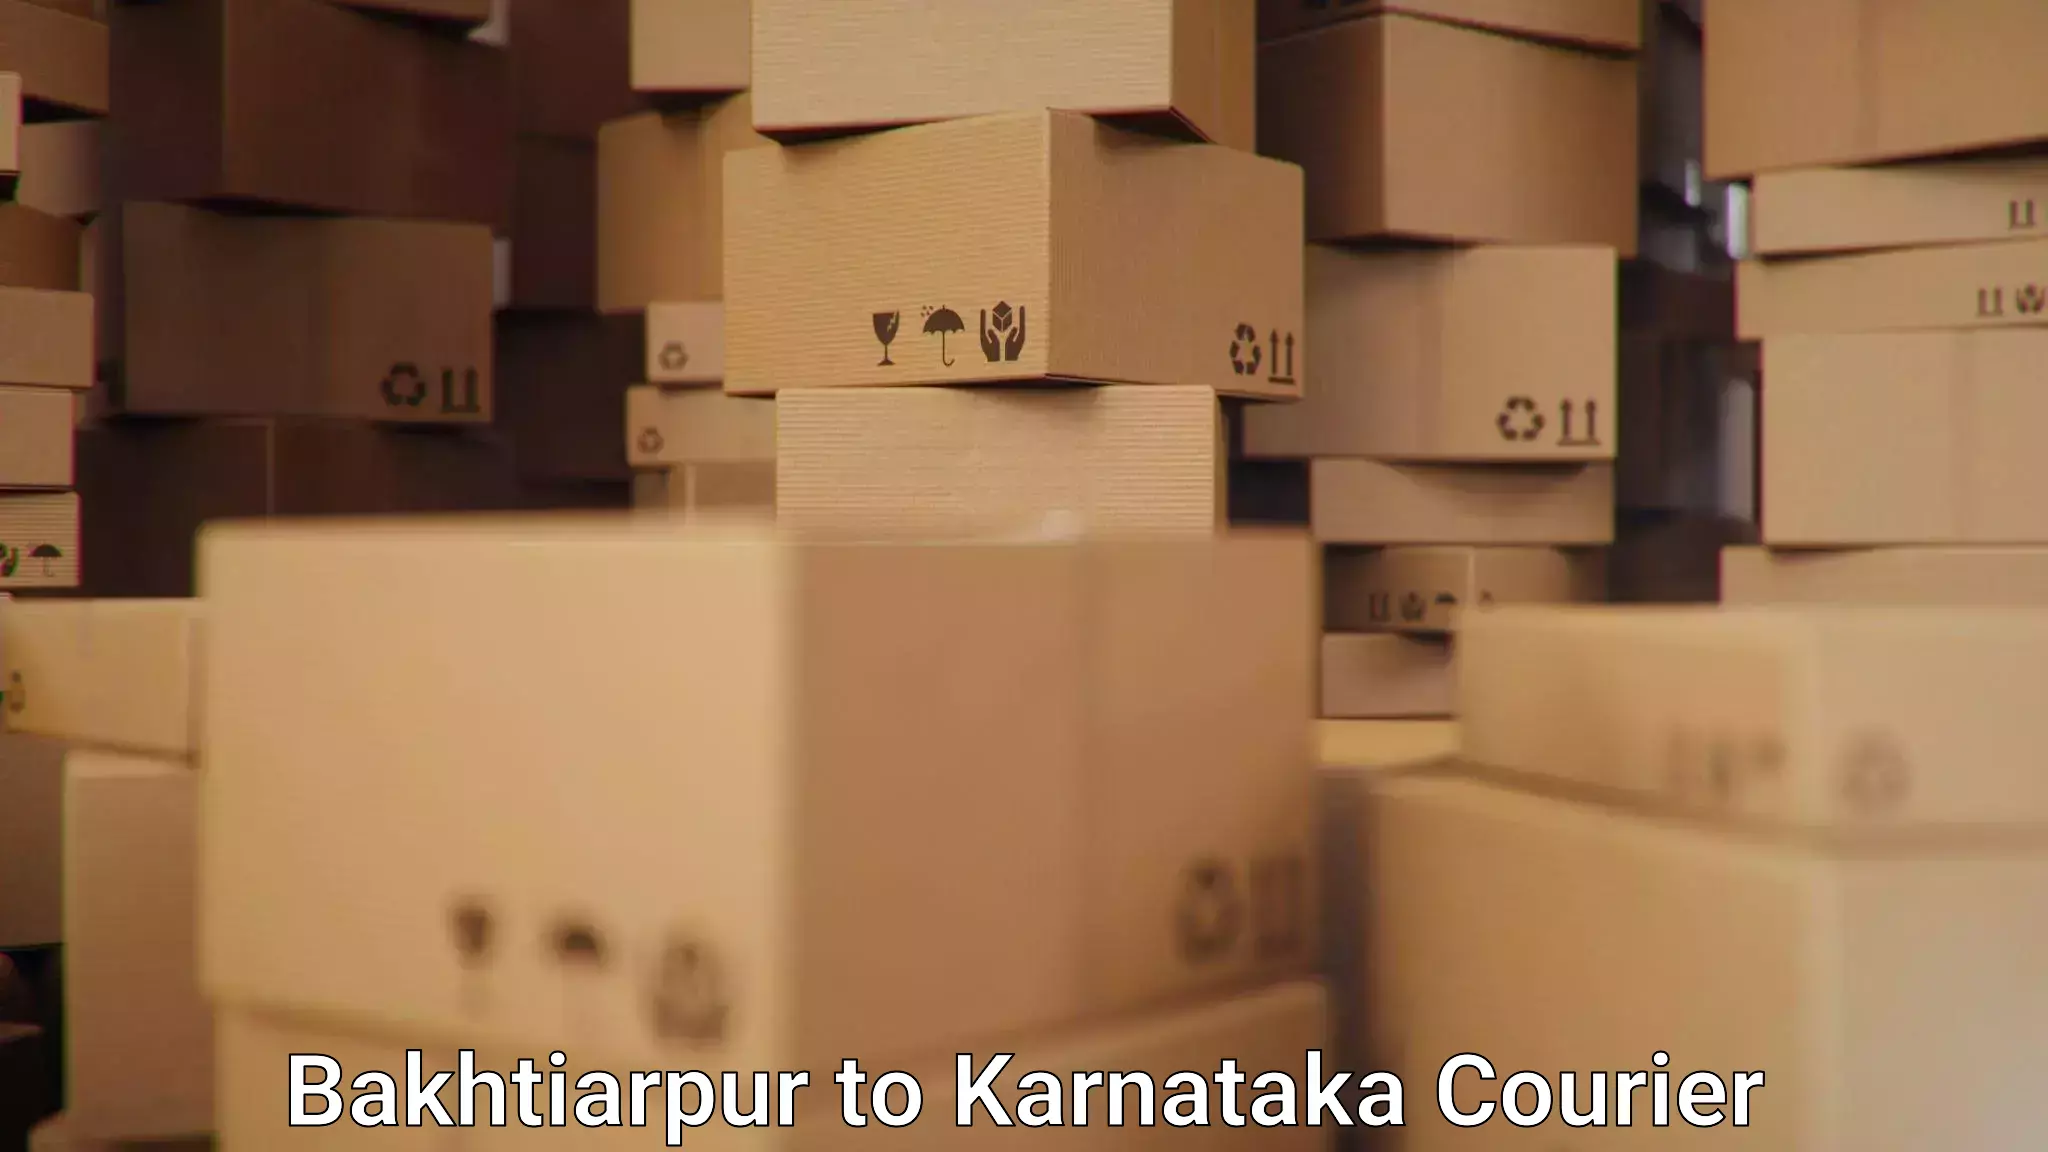 Efficient courier operations Bakhtiarpur to Manipal Academy of Higher Education